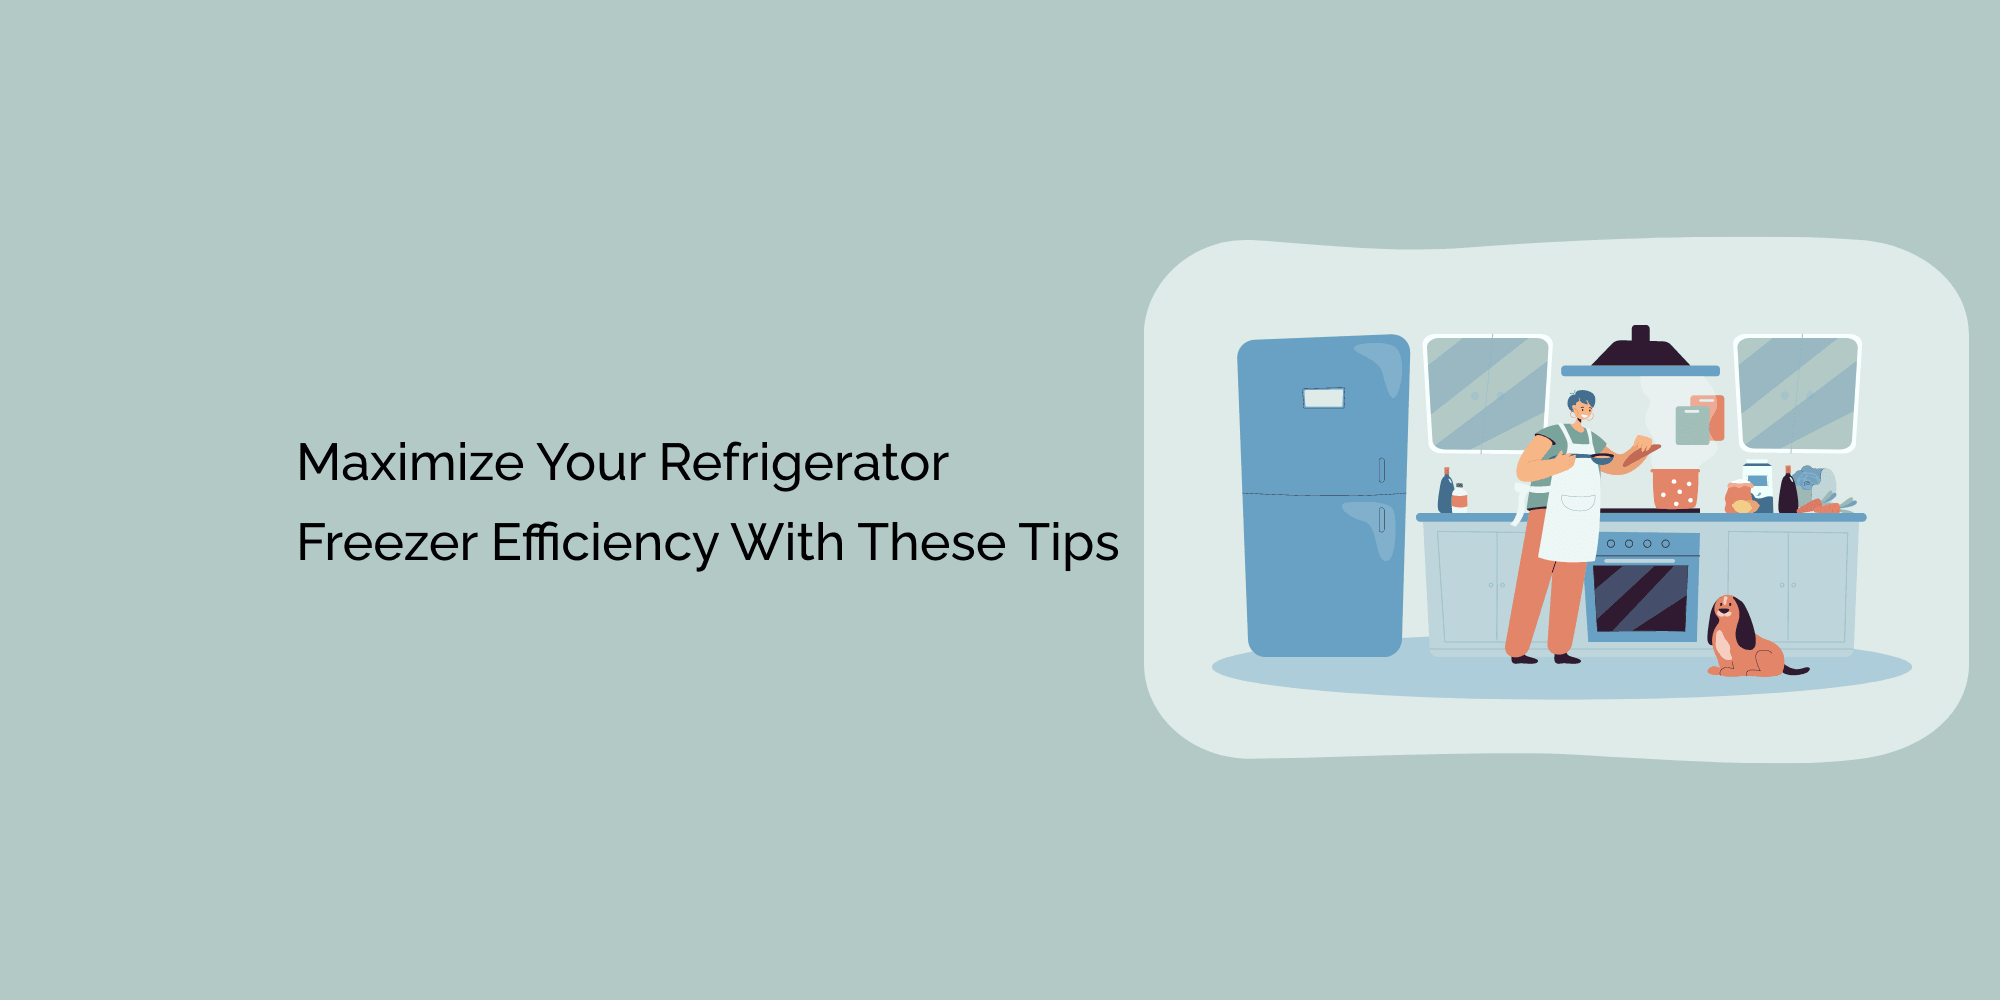 Maximize Your Refrigerator Freezer Efficiency with These Tips